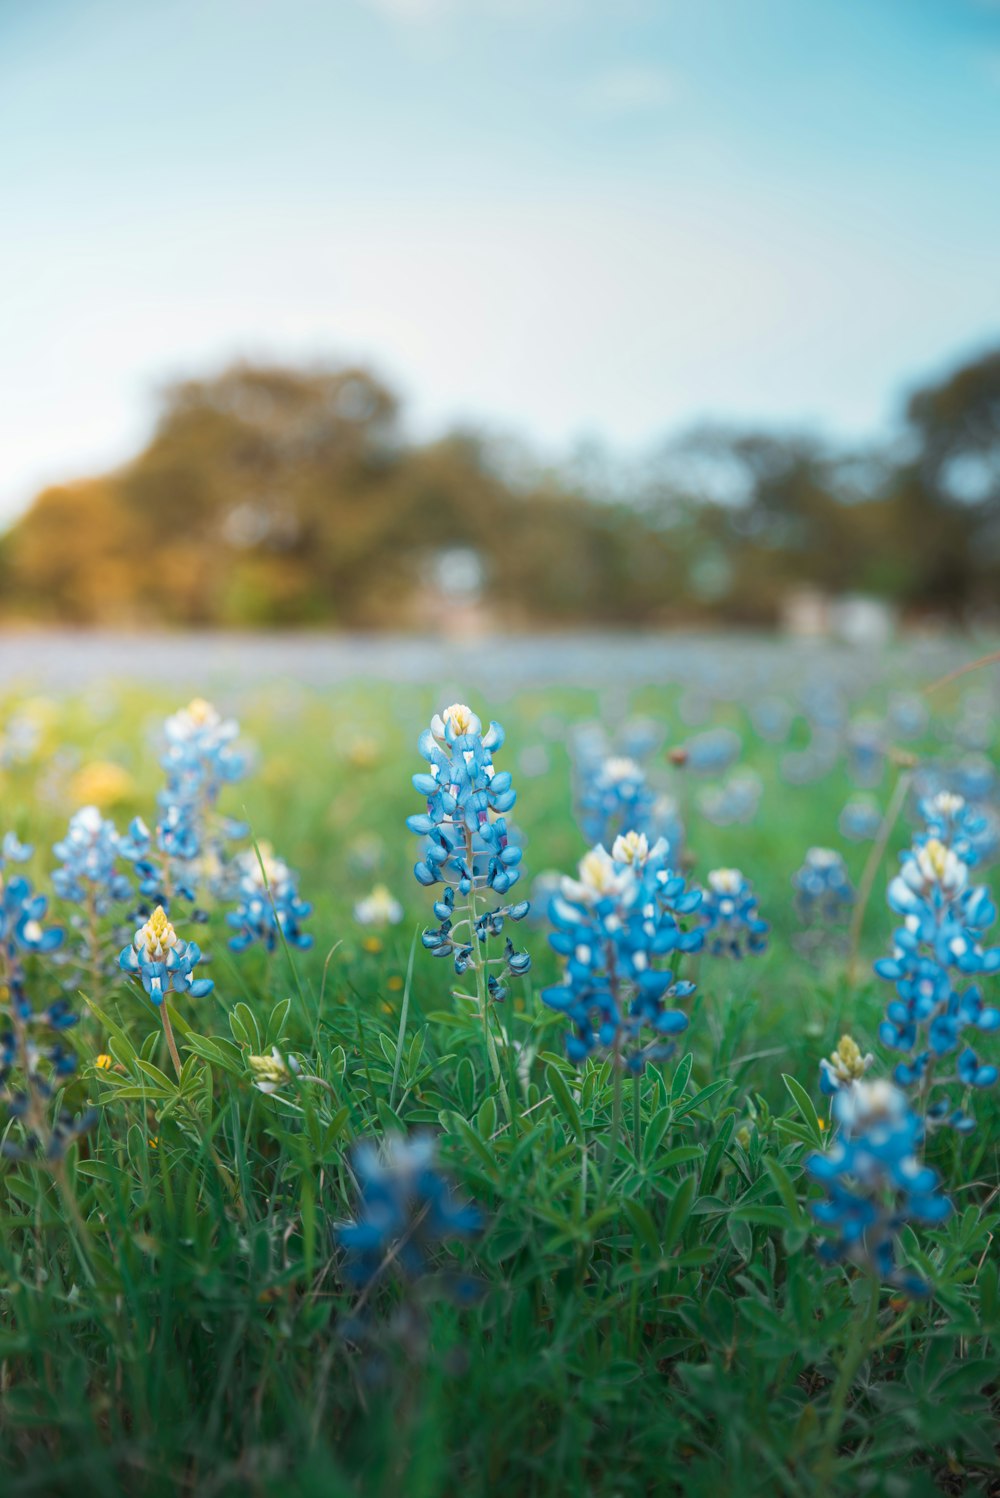 blue and white flowers on green grass field during daytime